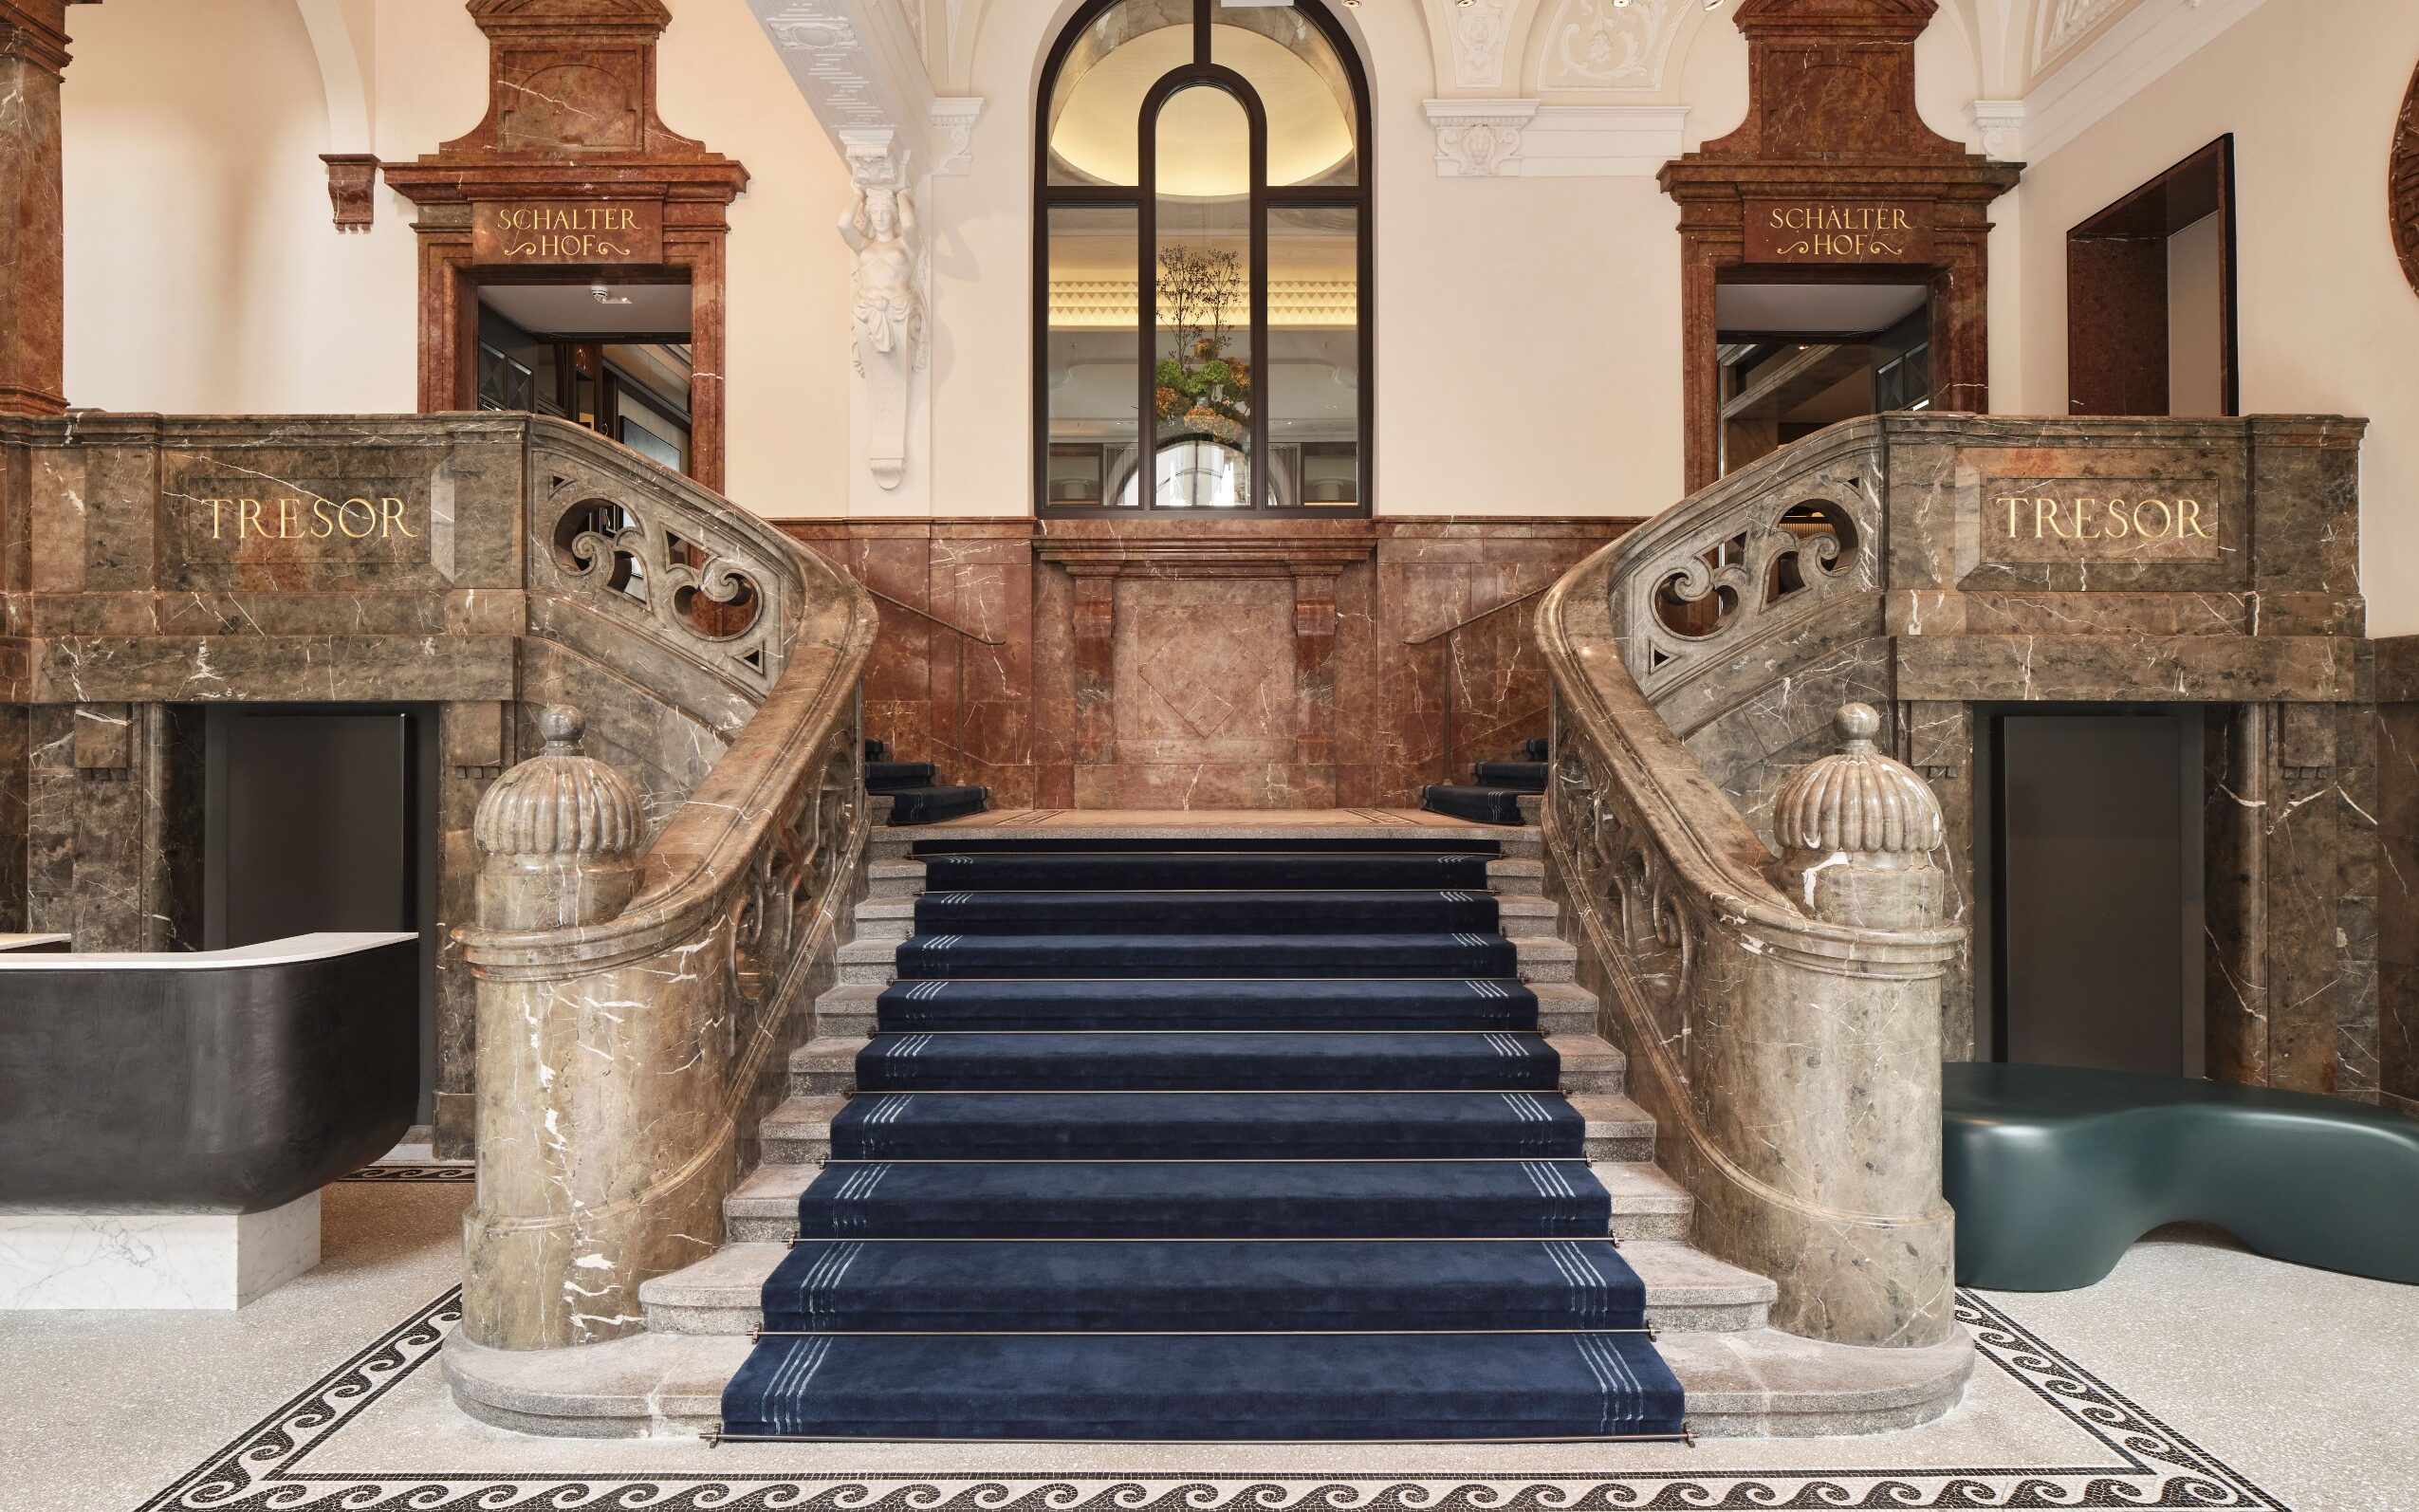 This Luxury Hotel in Munich’s Old Town Is Housed In Two Iconic Historic Buildings